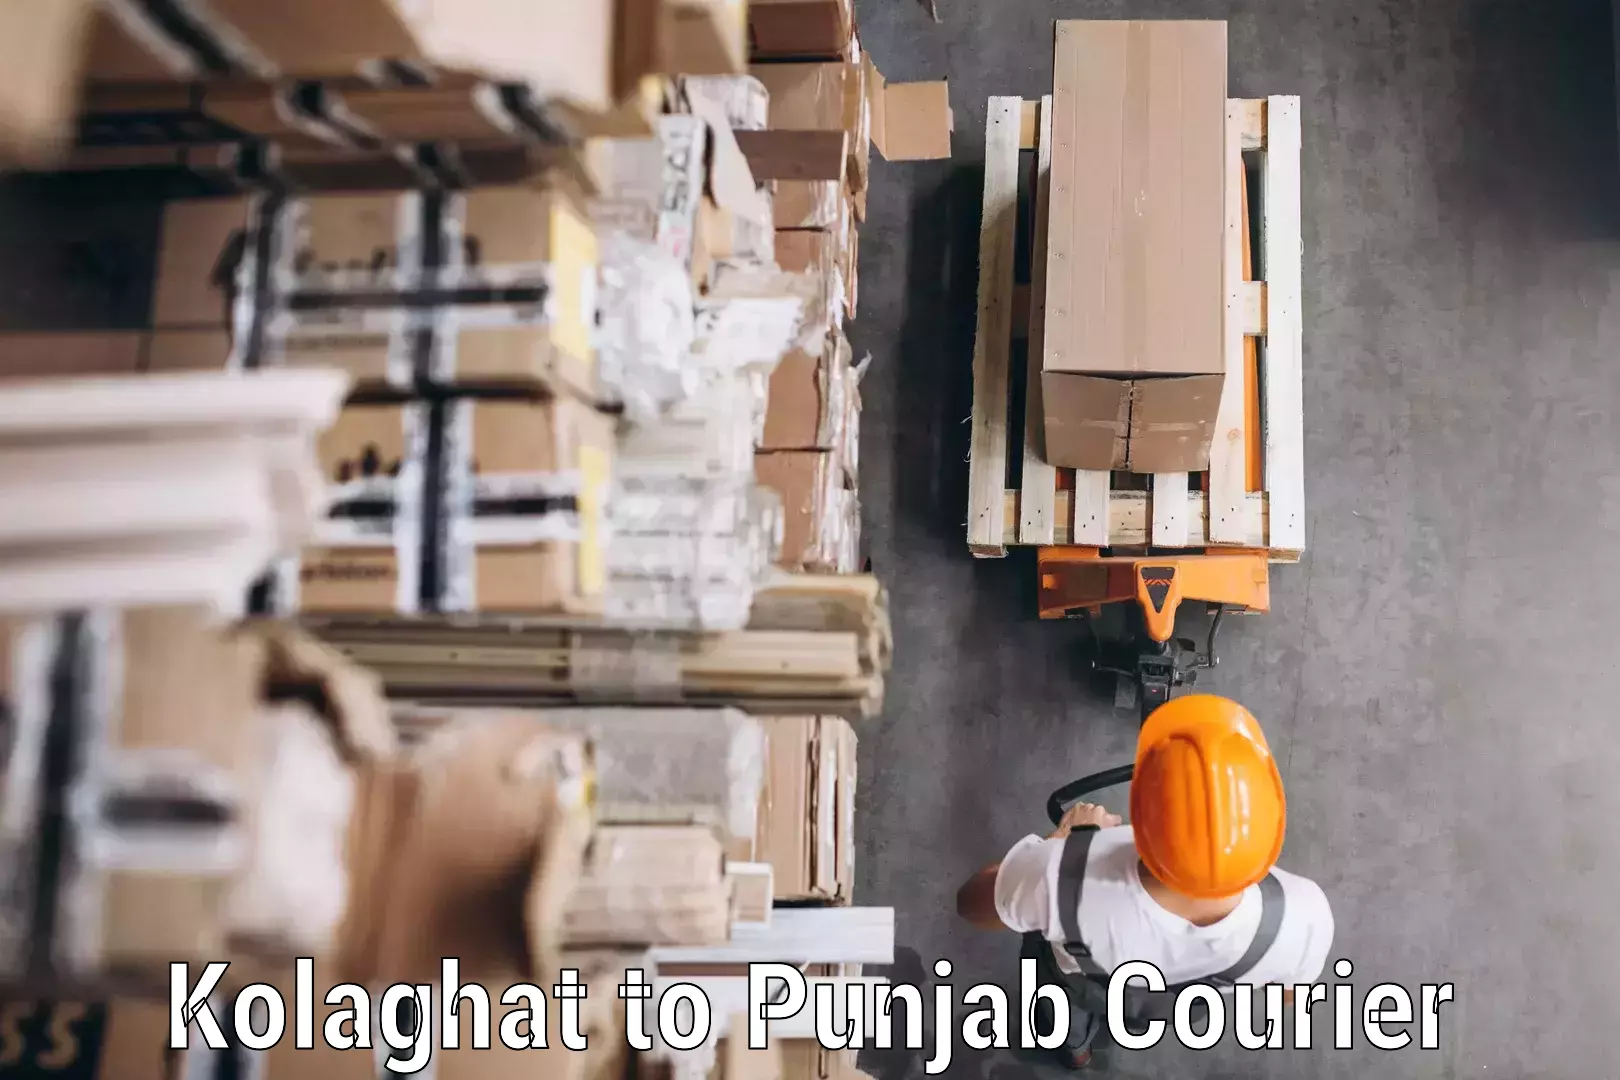 Courier rate comparison in Kolaghat to Mohali